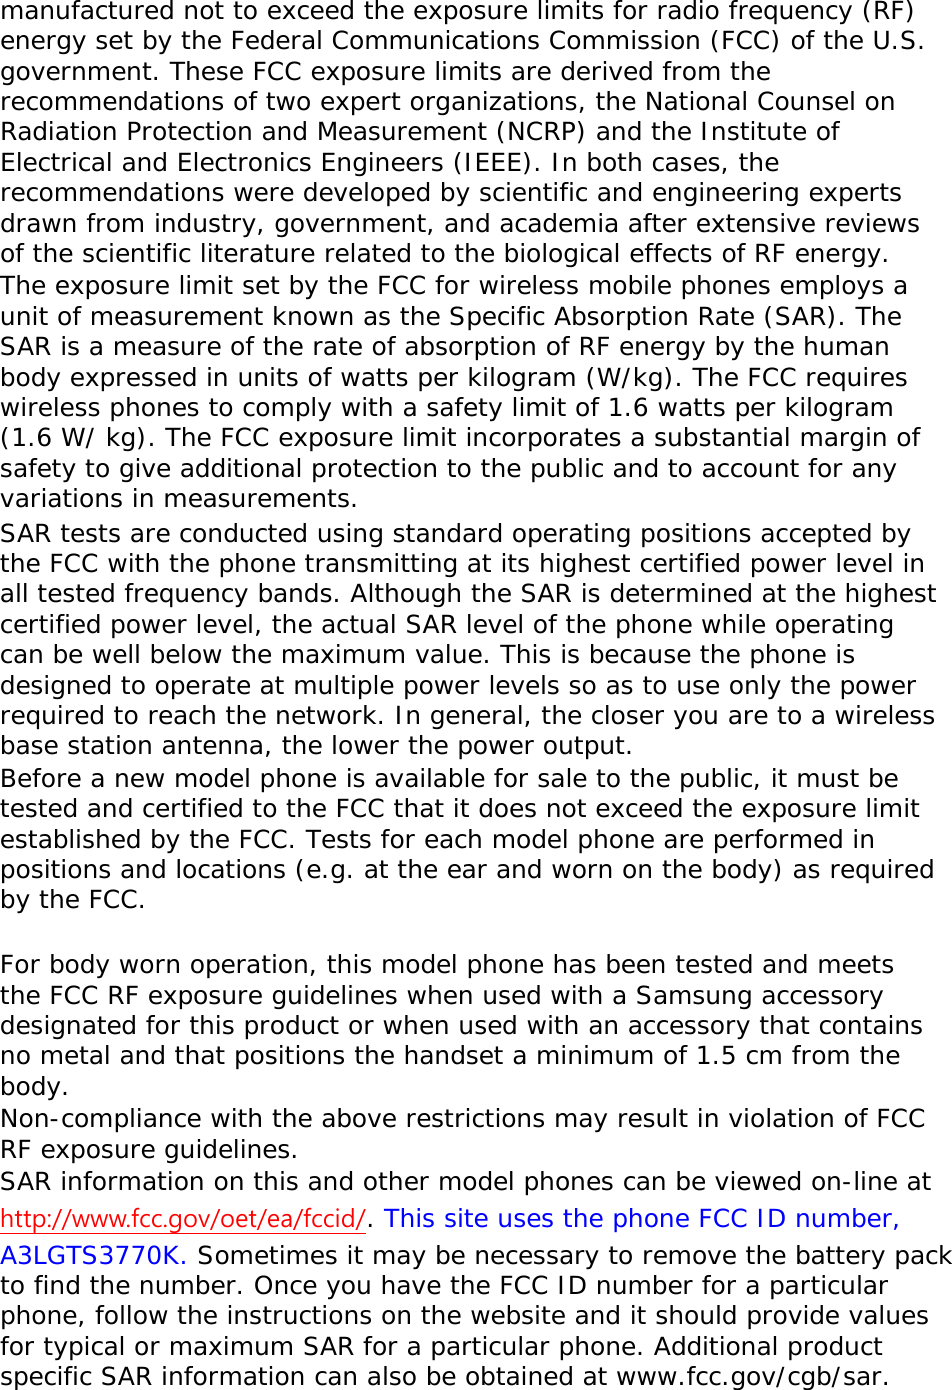 manufactured not to exceed the exposure limits for radio frequency (RF) energy set by the Federal Communications Commission (FCC) of the U.S. government. These FCC exposure limits are derived from the recommendations of two expert organizations, the National Counsel on Radiation Protection and Measurement (NCRP) and the Institute of Electrical and Electronics Engineers (IEEE). In both cases, the recommendations were developed by scientific and engineering experts drawn from industry, government, and academia after extensive reviews of the scientific literature related to the biological effects of RF energy. The exposure limit set by the FCC for wireless mobile phones employs a unit of measurement known as the Specific Absorption Rate (SAR). The SAR is a measure of the rate of absorption of RF energy by the human body expressed in units of watts per kilogram (W/kg). The FCC requires wireless phones to comply with a safety limit of 1.6 watts per kilogram (1.6 W/ kg). The FCC exposure limit incorporates a substantial margin of safety to give additional protection to the public and to account for any variations in measurements. SAR tests are conducted using standard operating positions accepted by the FCC with the phone transmitting at its highest certified power level in all tested frequency bands. Although the SAR is determined at the highest certified power level, the actual SAR level of the phone while operating can be well below the maximum value. This is because the phone is designed to operate at multiple power levels so as to use only the power required to reach the network. In general, the closer you are to a wireless base station antenna, the lower the power output. Before a new model phone is available for sale to the public, it must be tested and certified to the FCC that it does not exceed the exposure limit established by the FCC. Tests for each model phone are performed in positions and locations (e.g. at the ear and worn on the body) as required by the FCC.    For body worn operation, this model phone has been tested and meets the FCC RF exposure guidelines when used with a Samsung accessory designated for this product or when used with an accessory that contains no metal and that positions the handset a minimum of 1.5 cm from the body.  Non-compliance with the above restrictions may result in violation of FCC RF exposure guidelines. SAR information on this and other model phones can be viewed on-line at http://www.fcc.gov/oet/ea/fccid/. This site uses the phone FCC ID number, A3LGTS3770K. Sometimes it may be necessary to remove the battery pack to find the number. Once you have the FCC ID number for a particular phone, follow the instructions on the website and it should provide values for typical or maximum SAR for a particular phone. Additional product specific SAR information can also be obtained at www.fcc.gov/cgb/sar. 